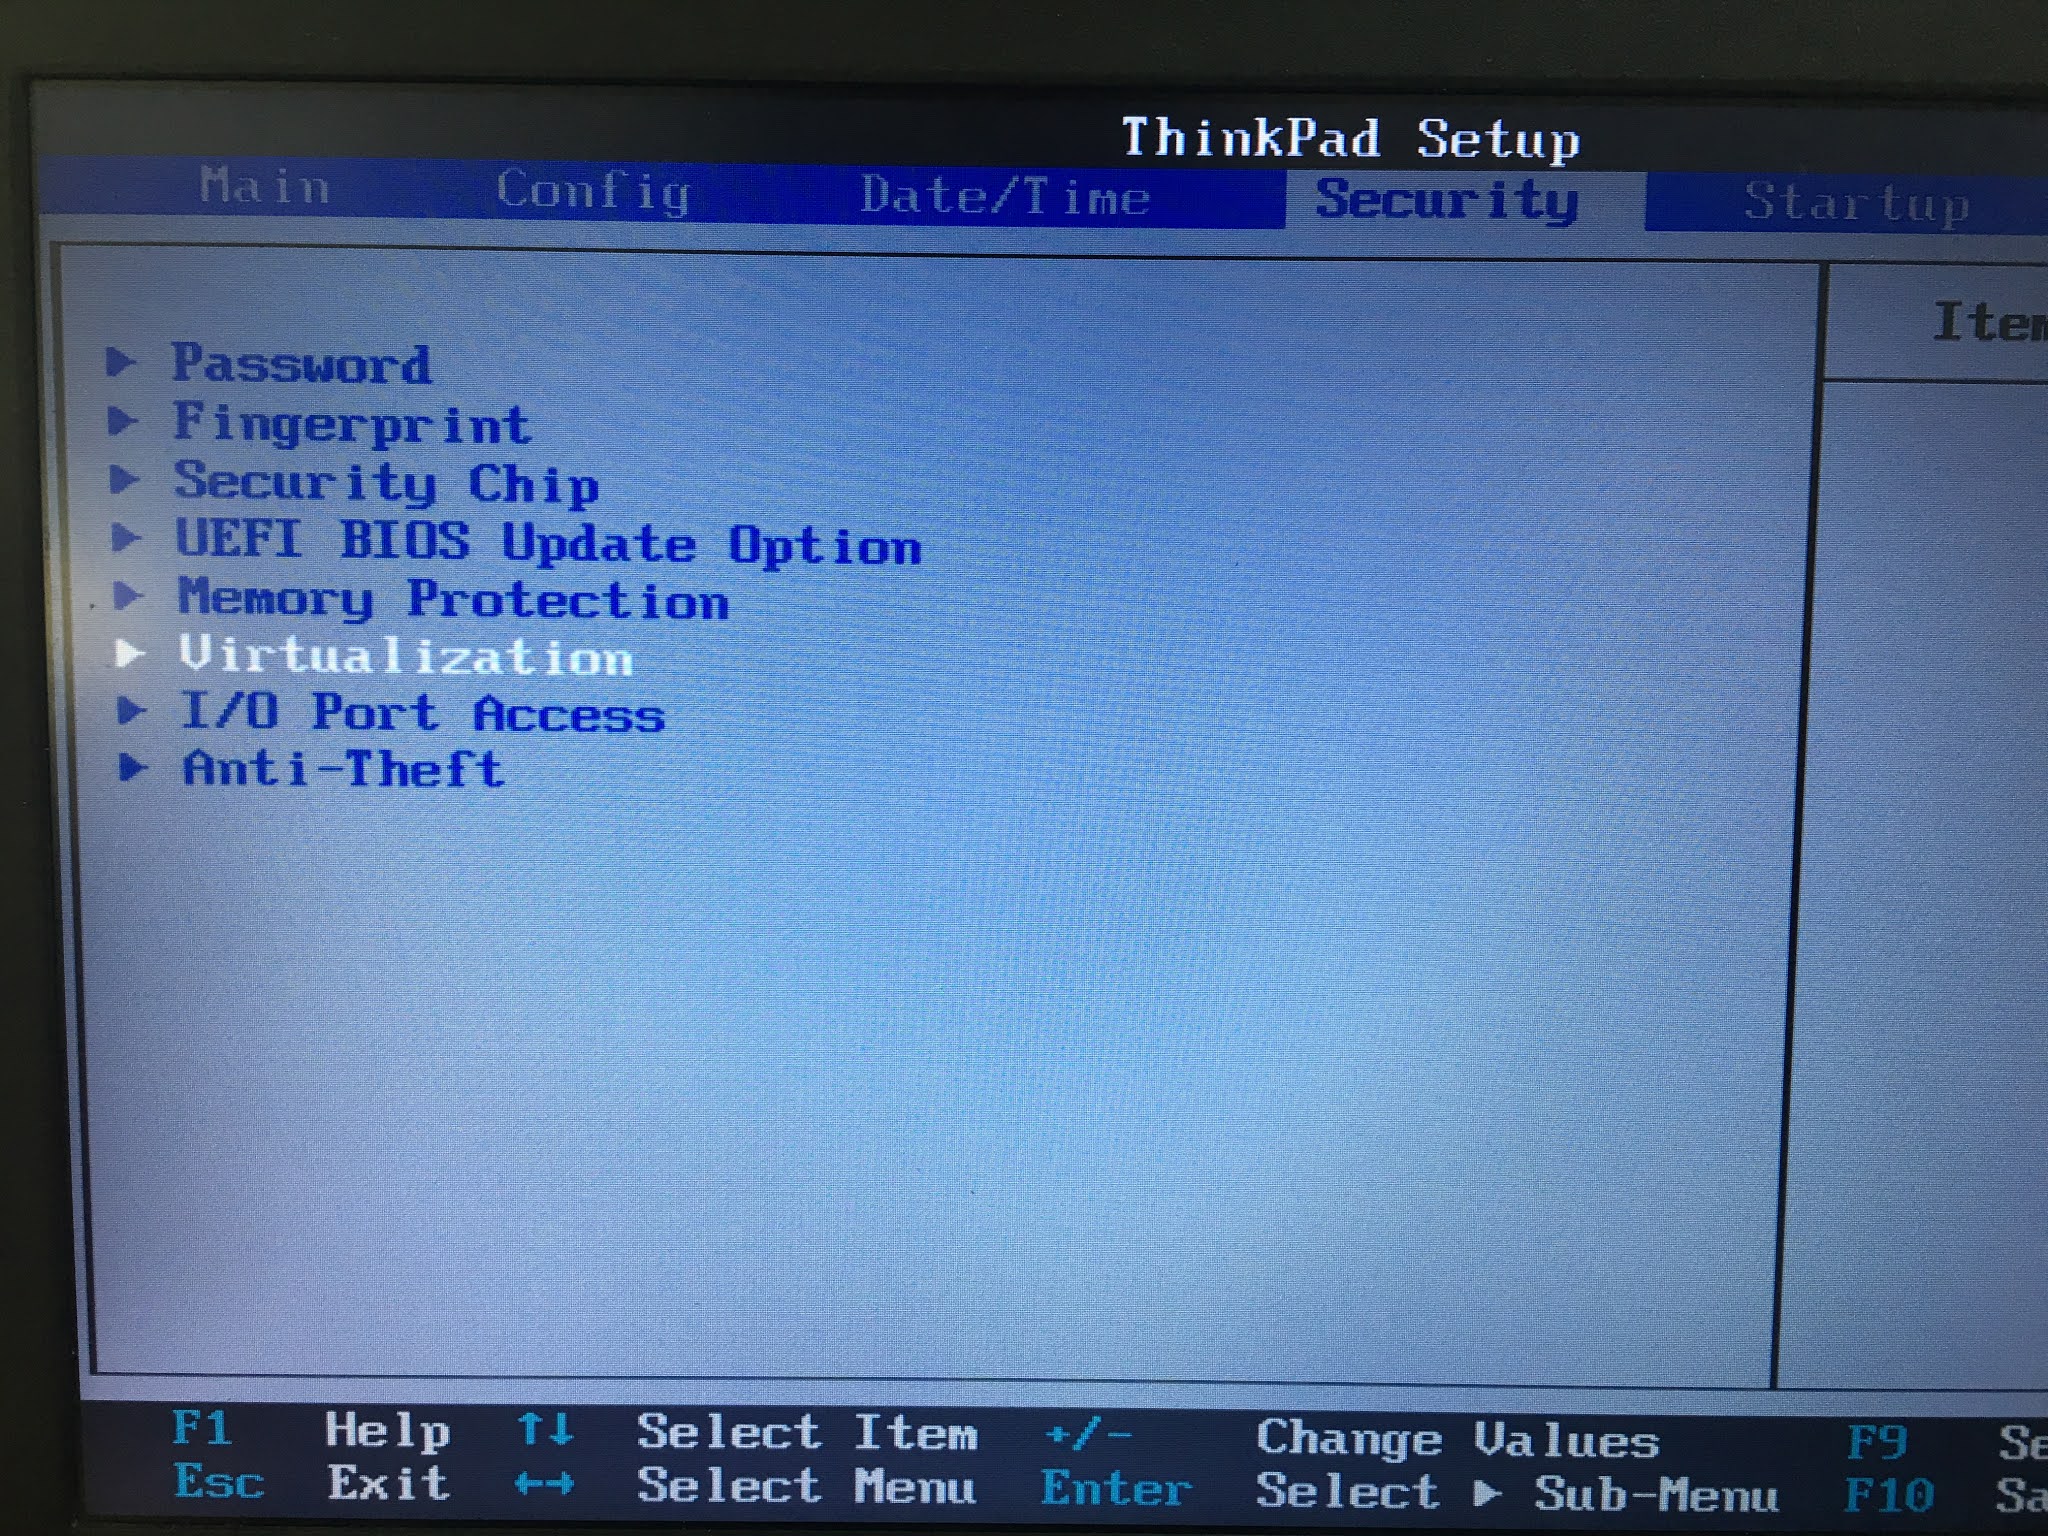 vt back in the chip and around the bios